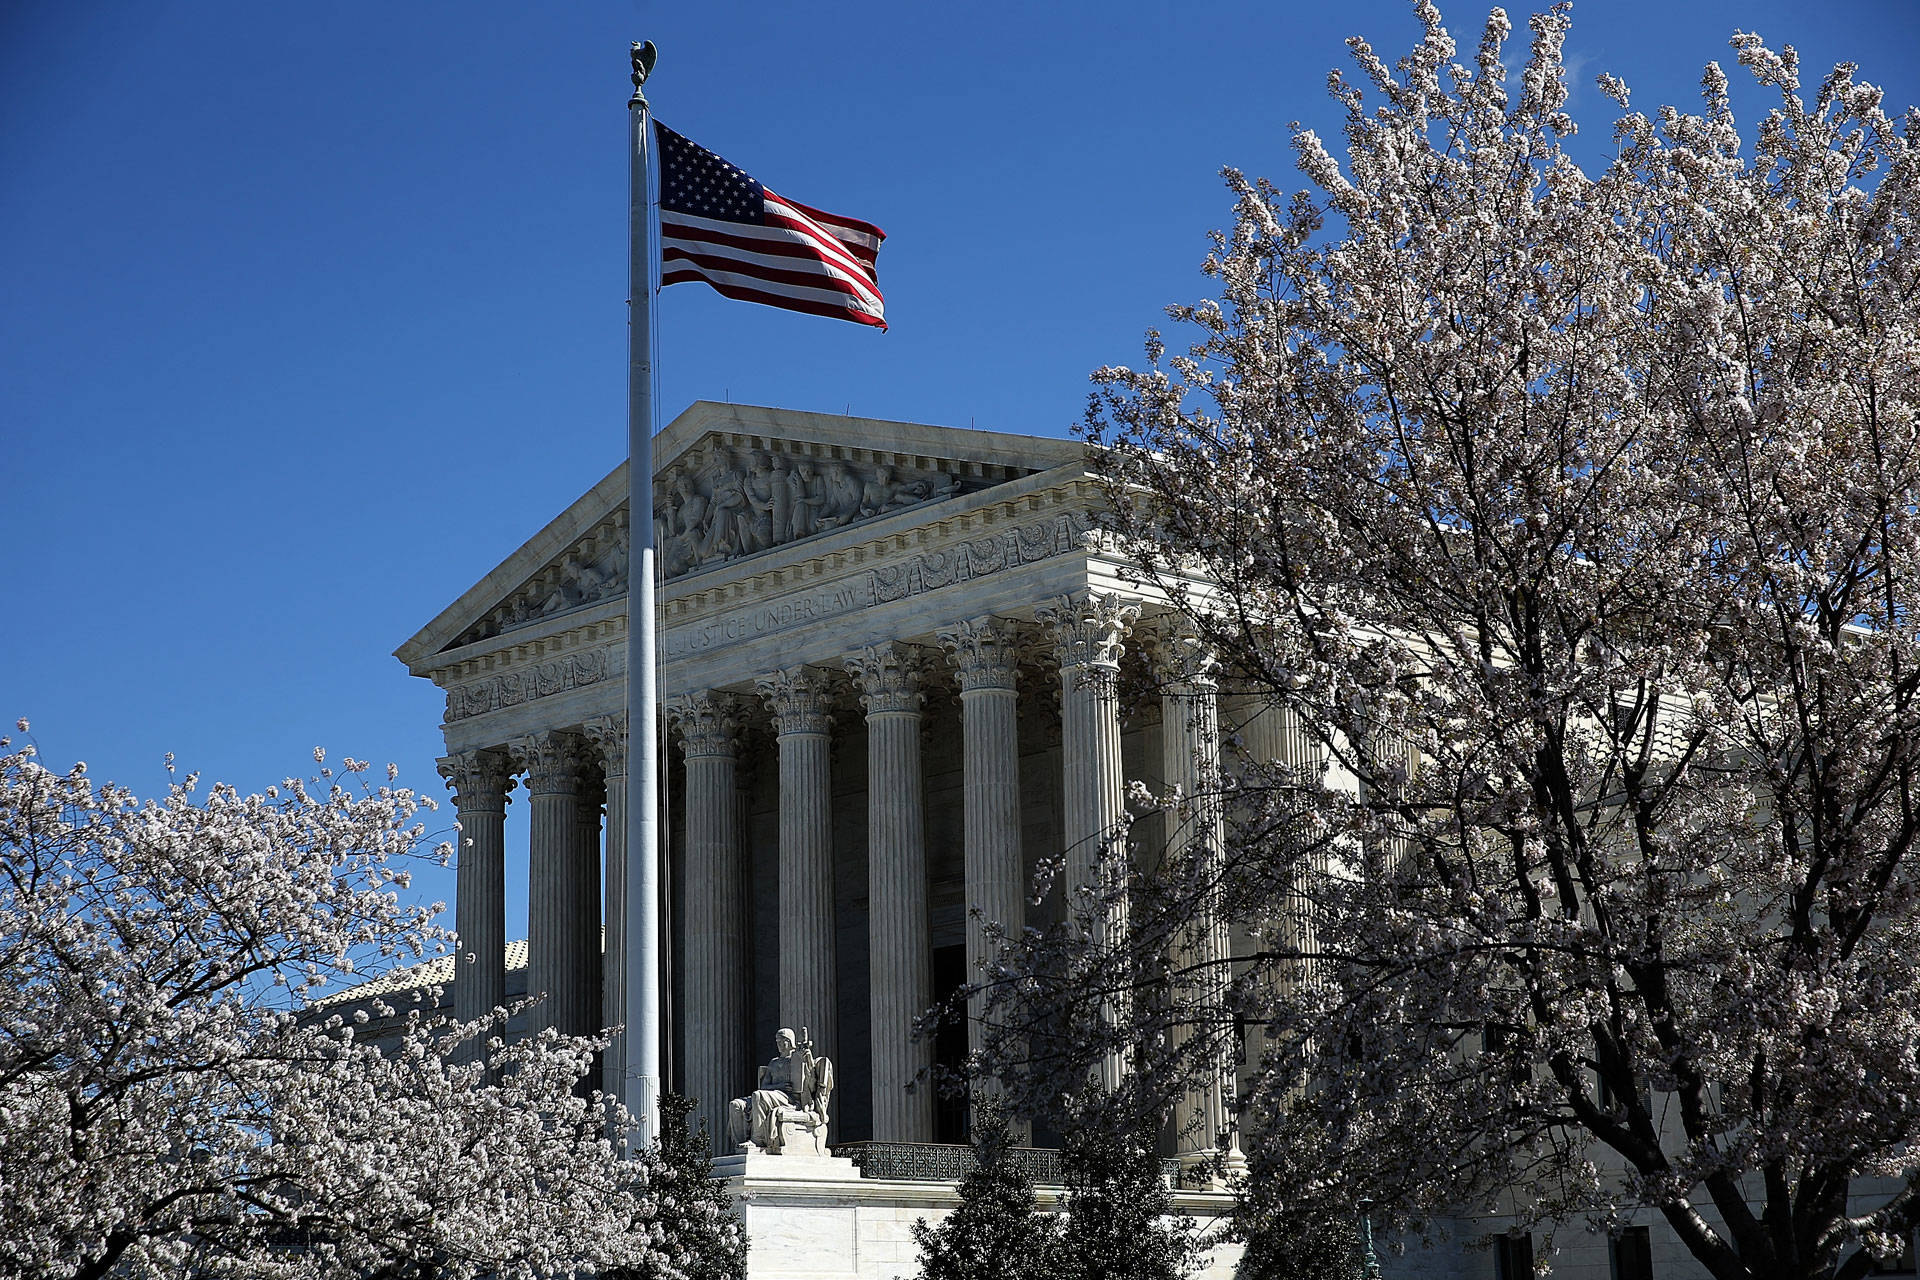 The U.S. Supreme Court in Washington, D.C. Win McNamee/Getty Images